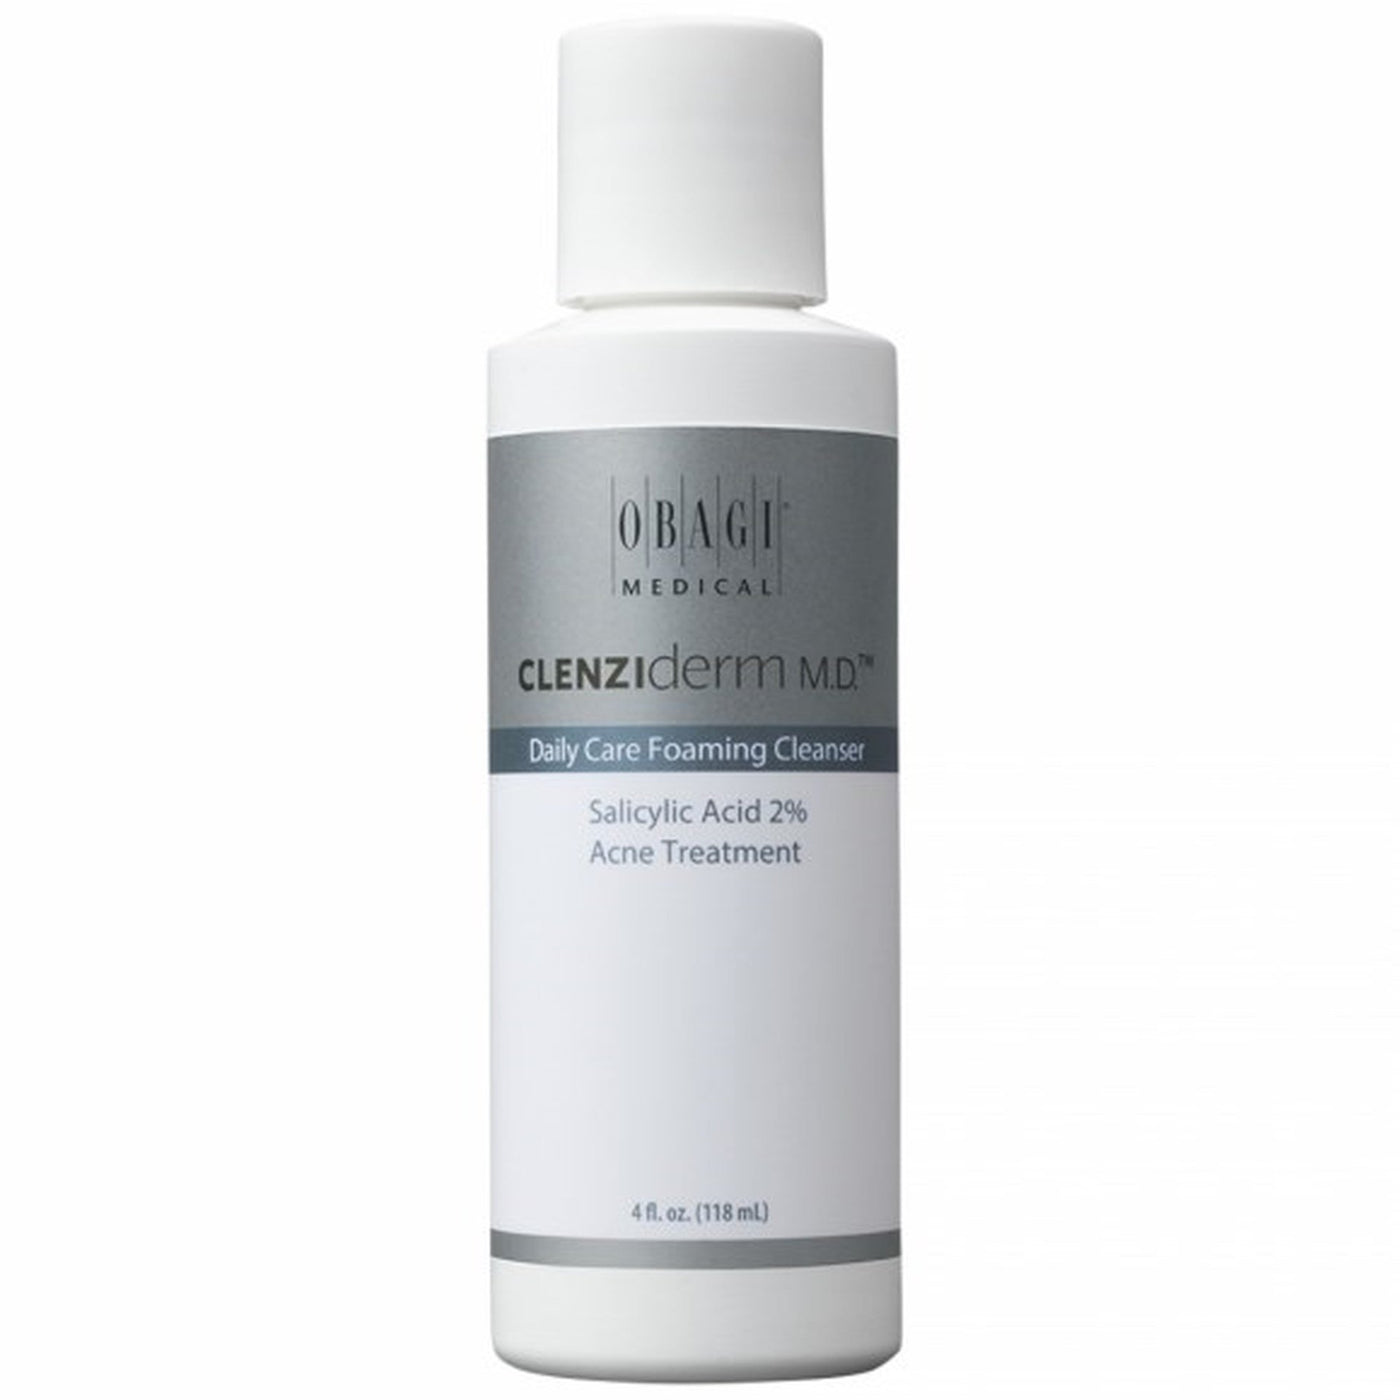 Obagi Medical CLENZIderm M.D. DAILY CARE FOAMING CLEANSER